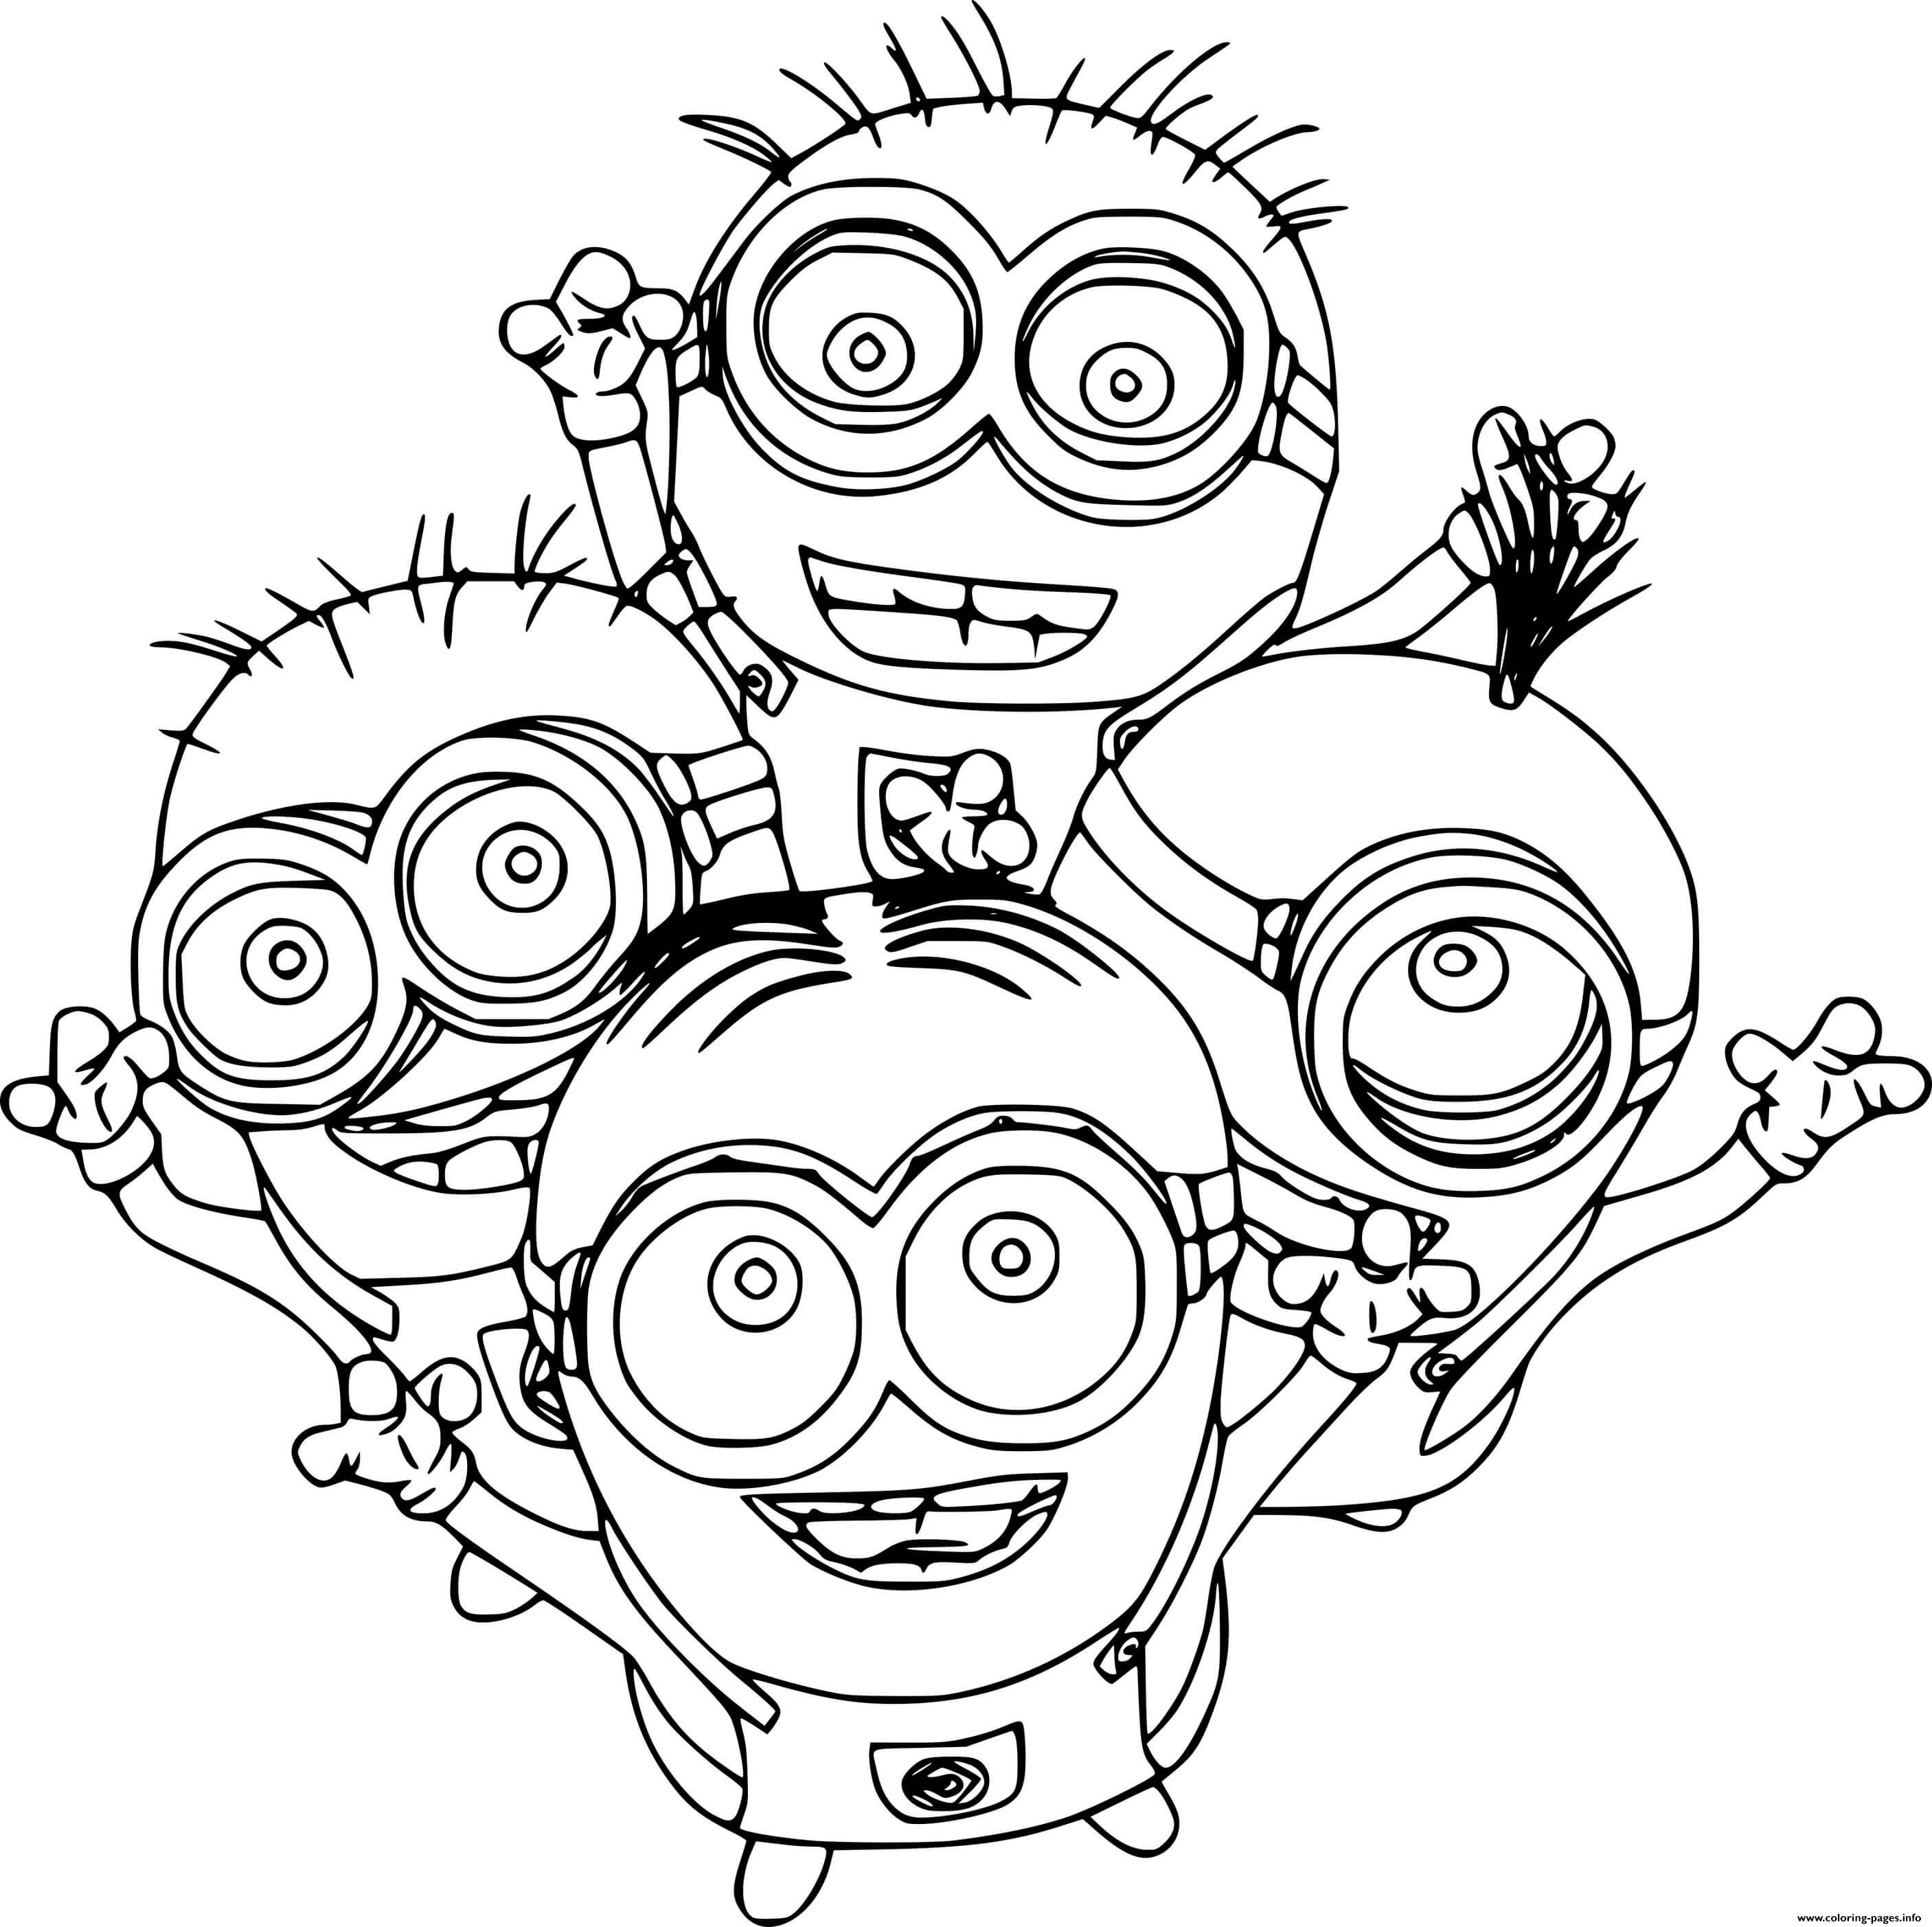 Four Minions coloring